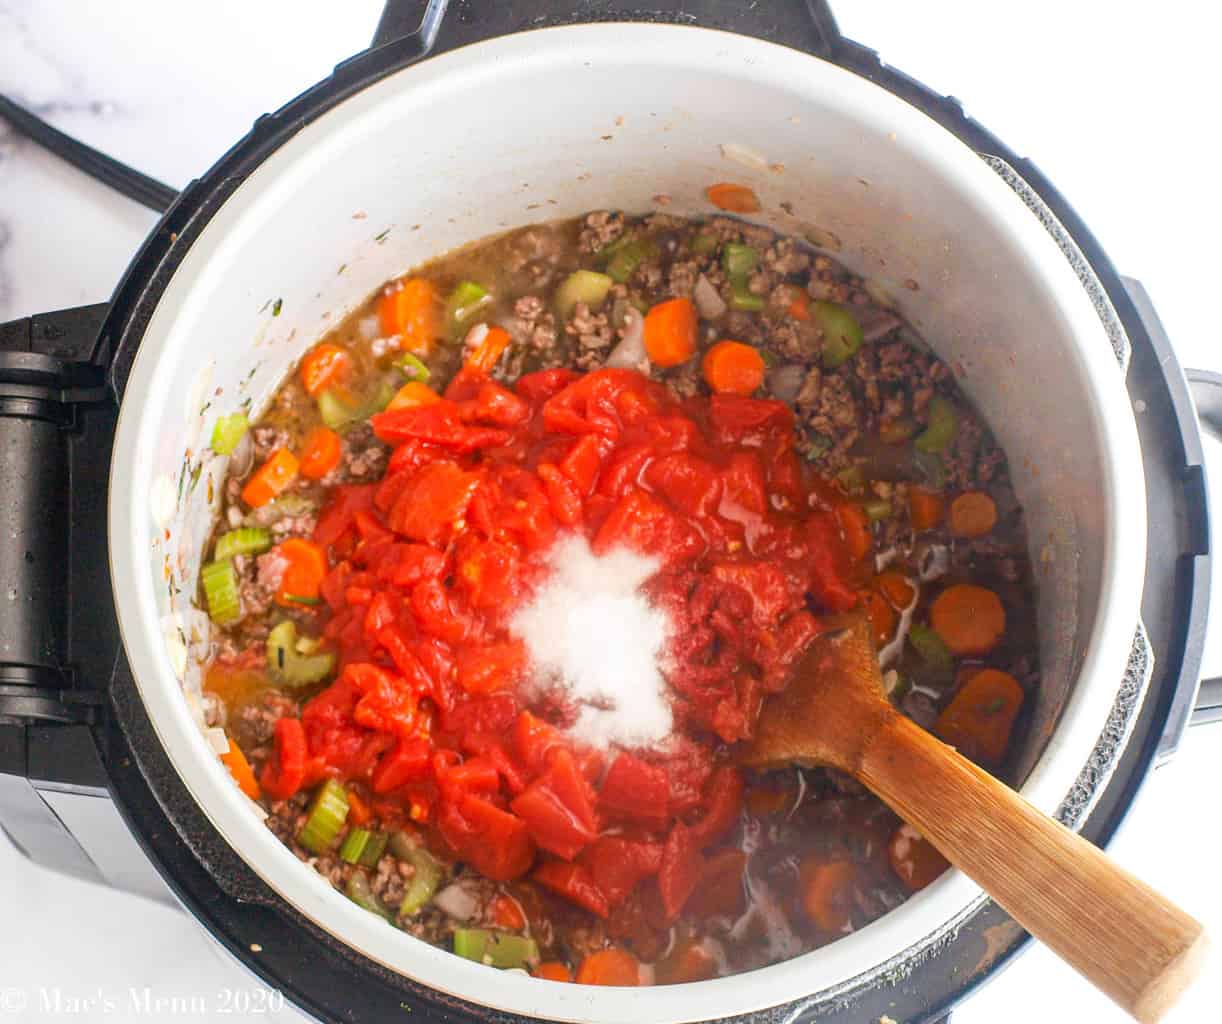 Tomatoes, tomato paste, and salt added into the meat and veggies in the pressure cooker 